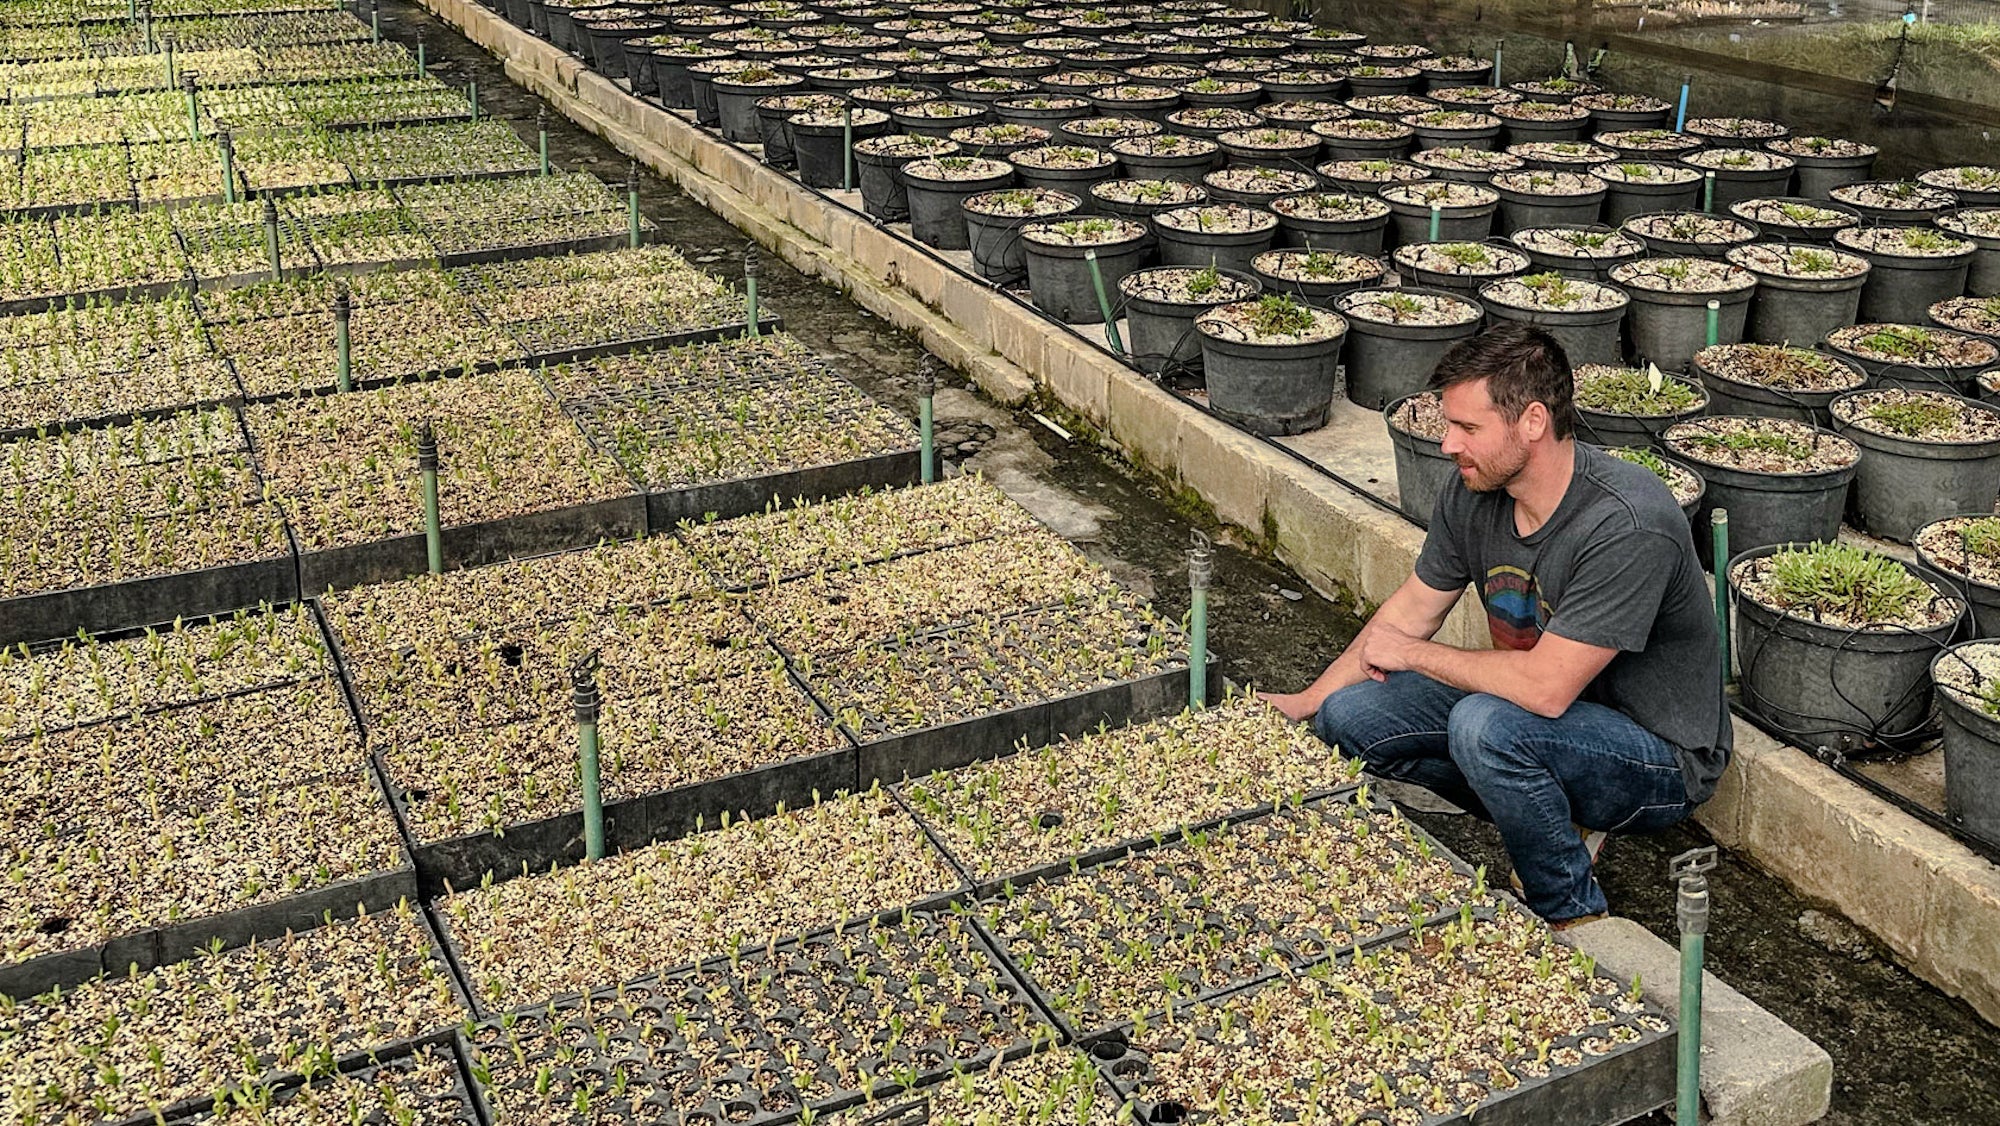 An image of Kanna Extract Company founder at a Kanna Farm in South Africa cultivating high mesembrine potency sceletium tortuosum plants for bulk wholesale and for sale to kanna distributors.